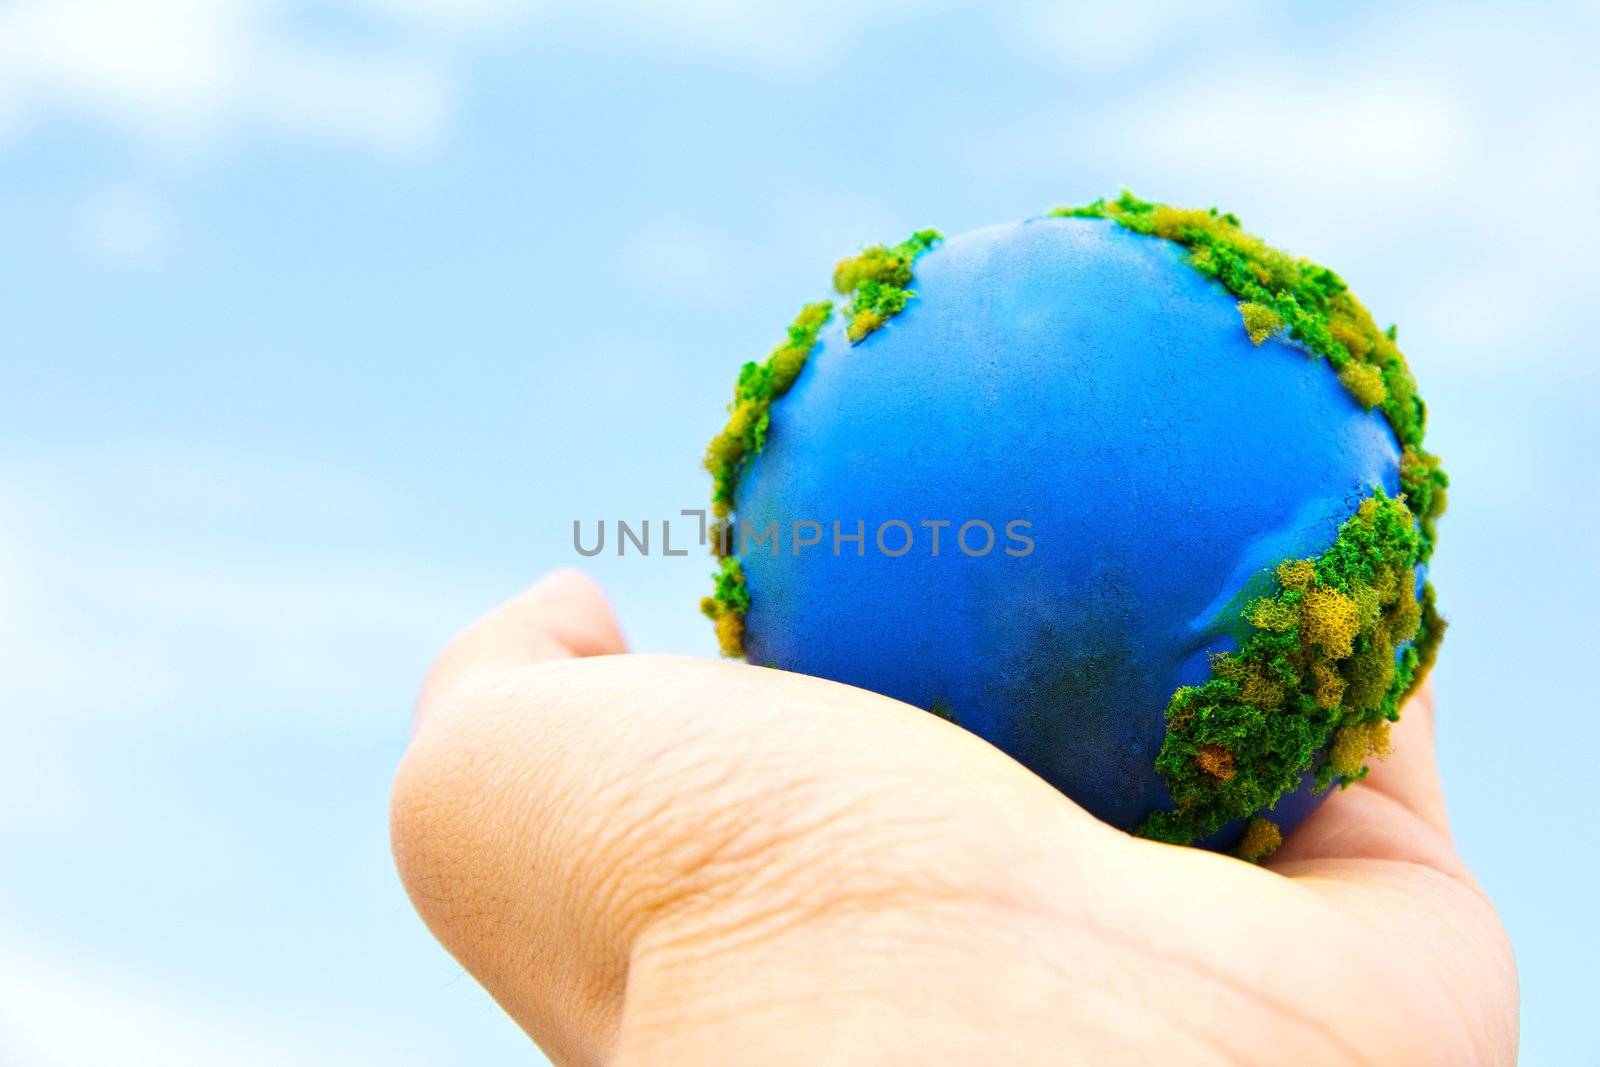 Hands and Earth. Concept Save green planet.